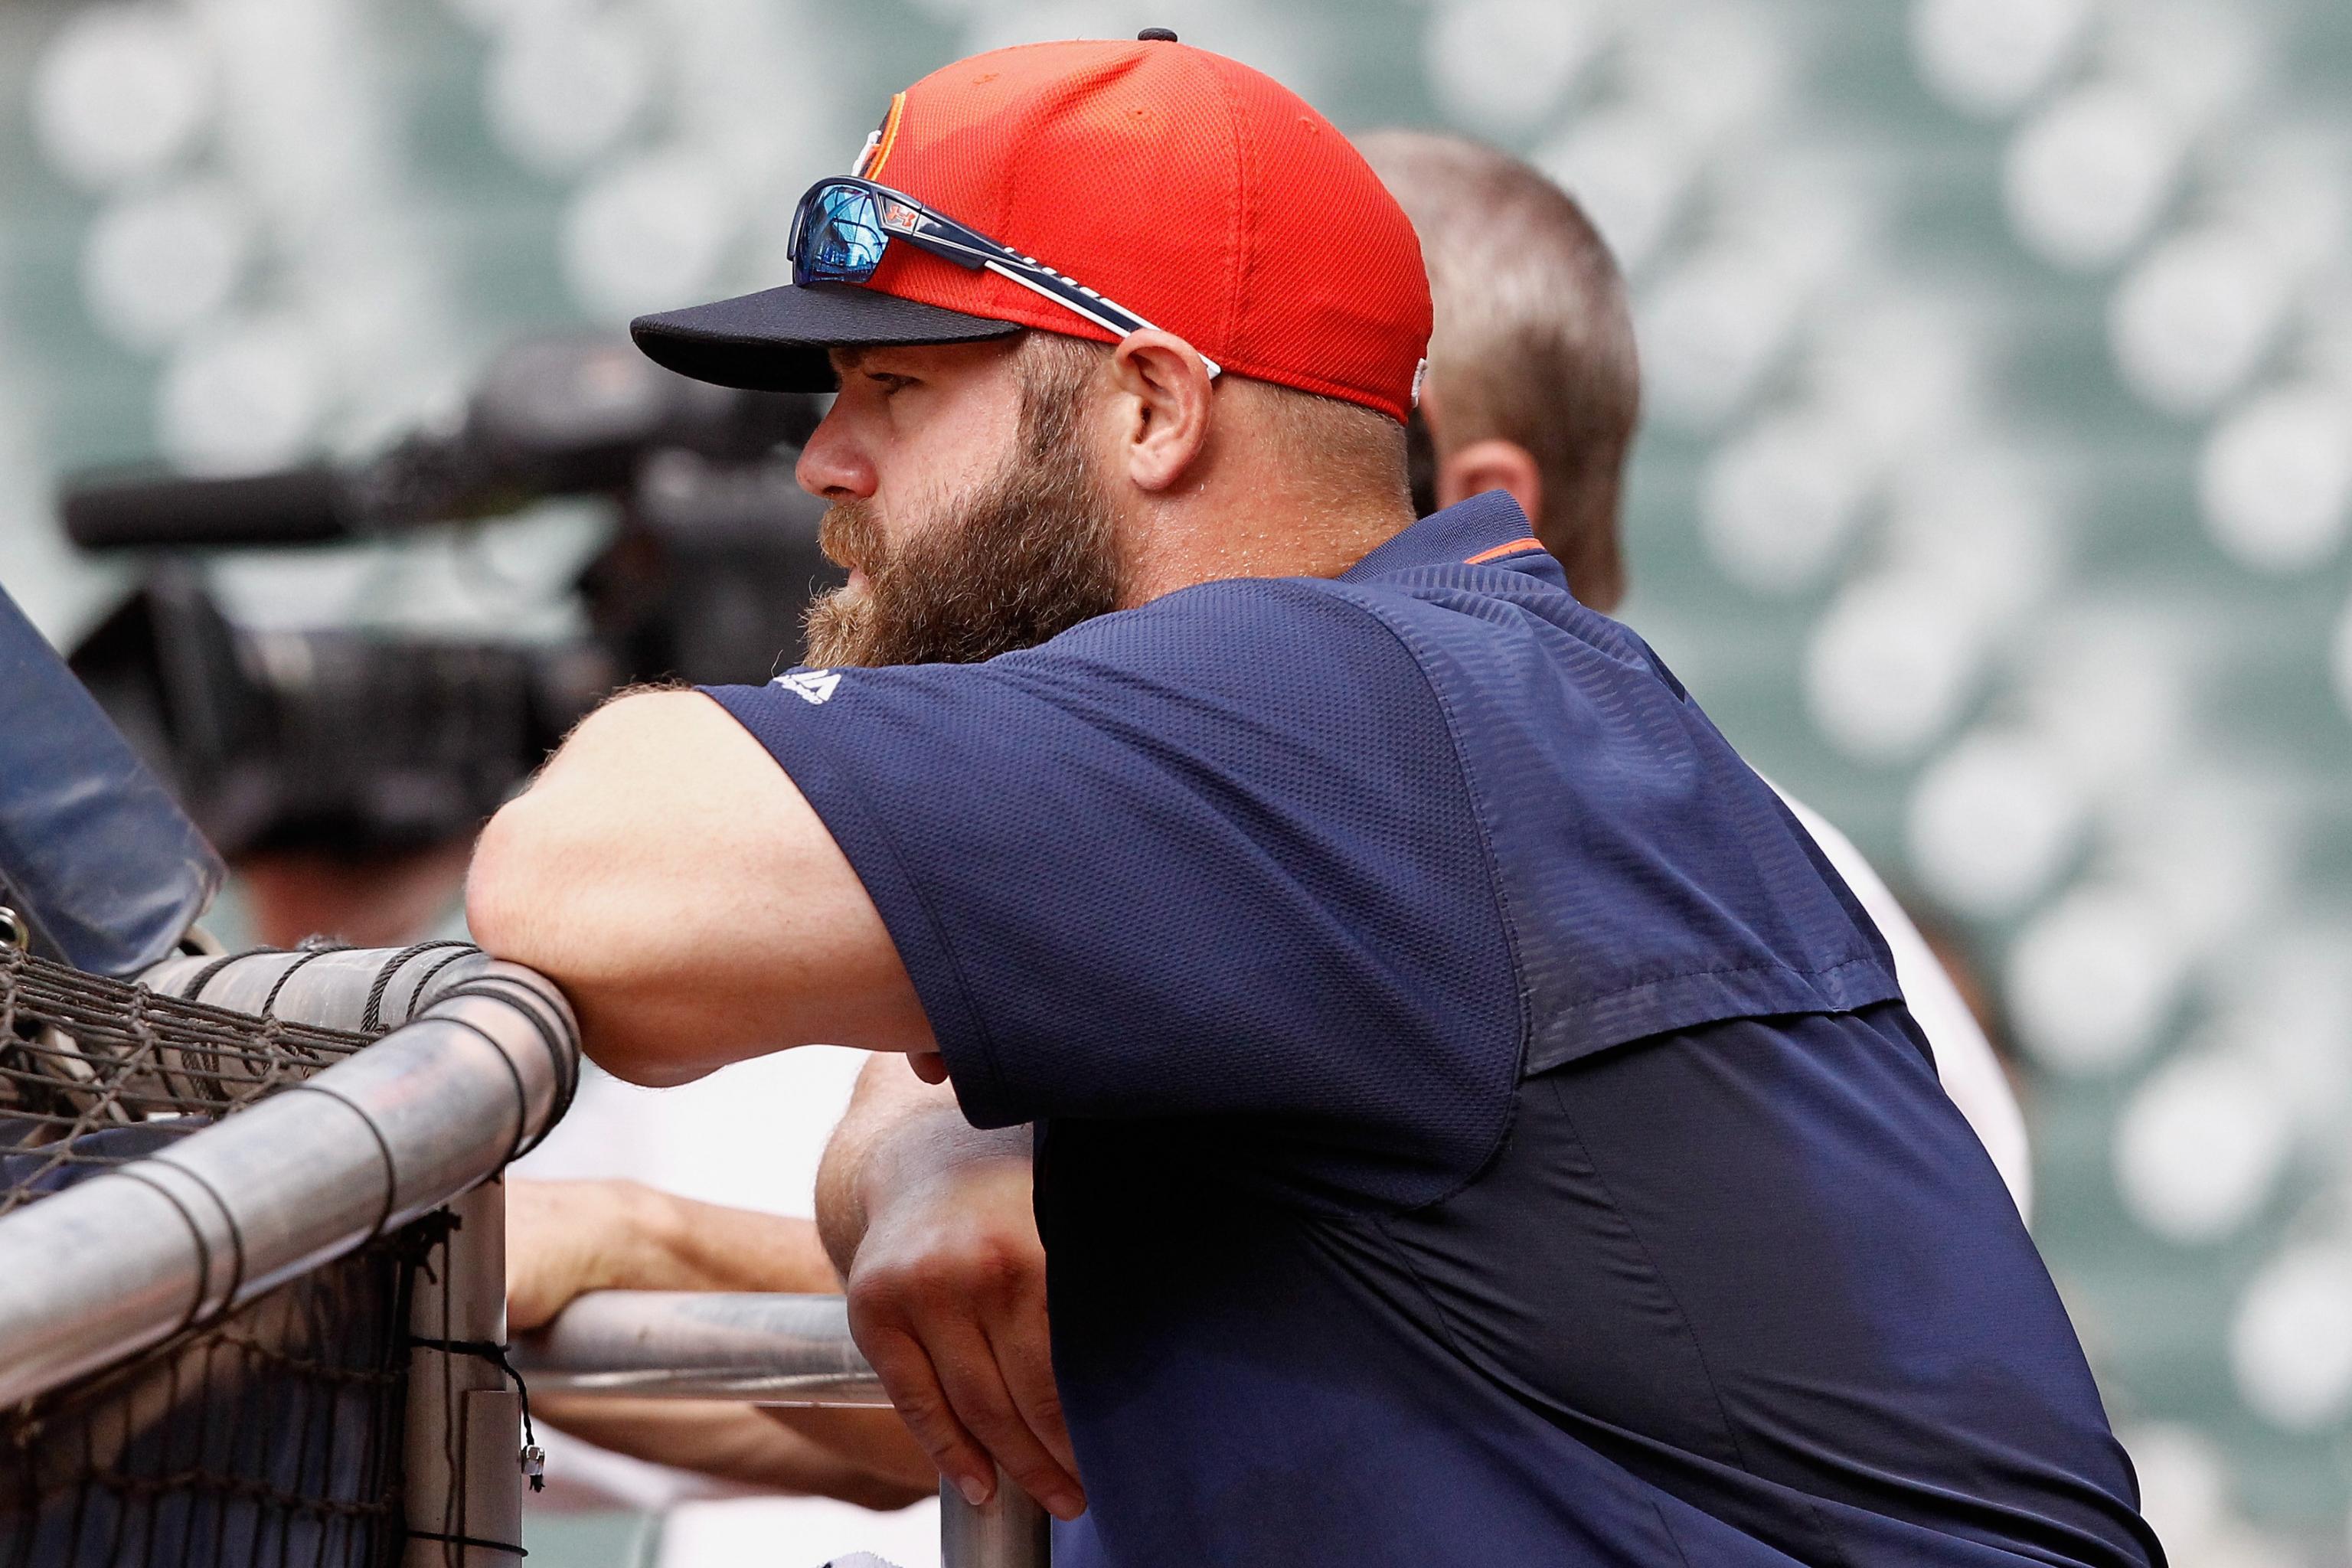 Houston Astros: Evan Gattis talks his DII roots and the rise of El